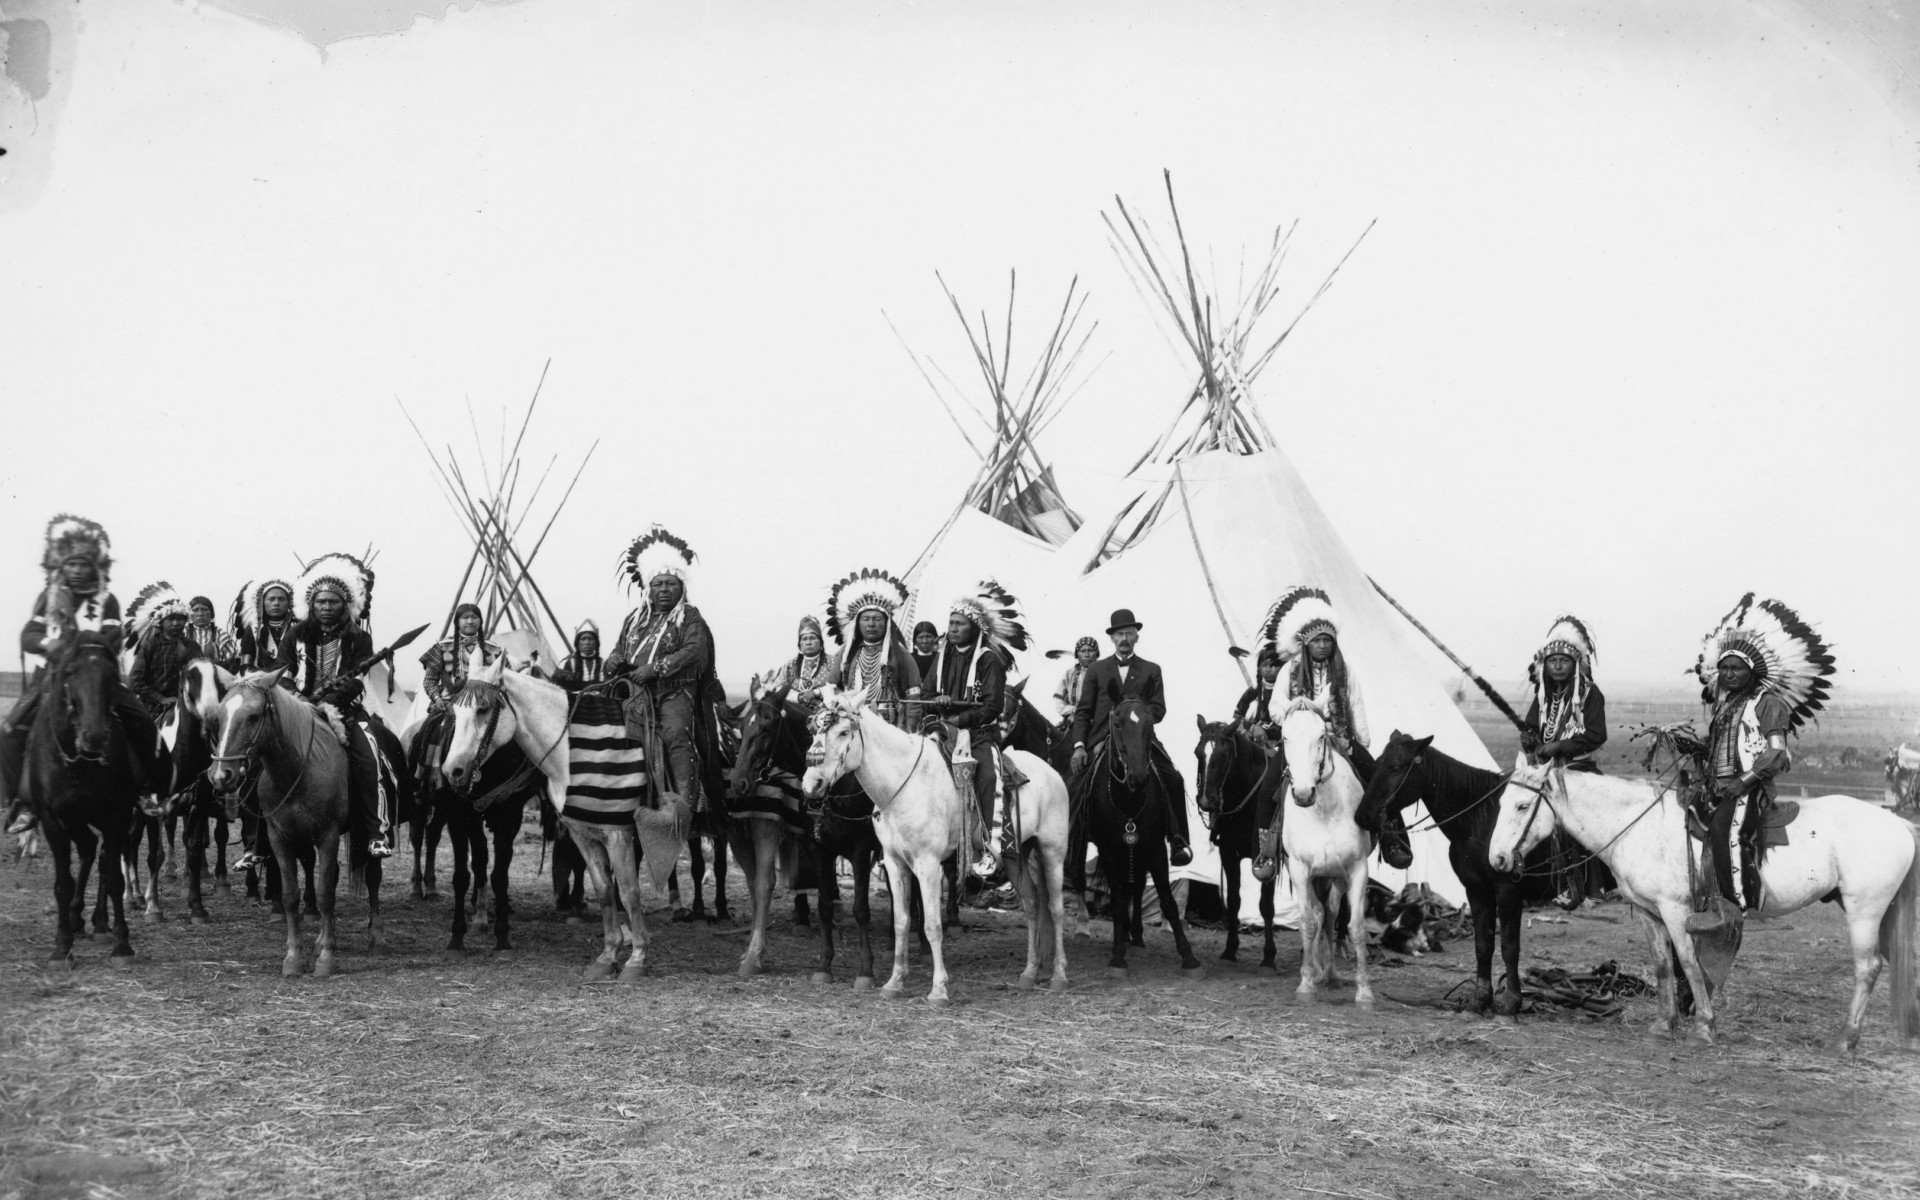 Indians horses tepee feathers retro vintage photo black white native american people crowd history wallpaperx1200